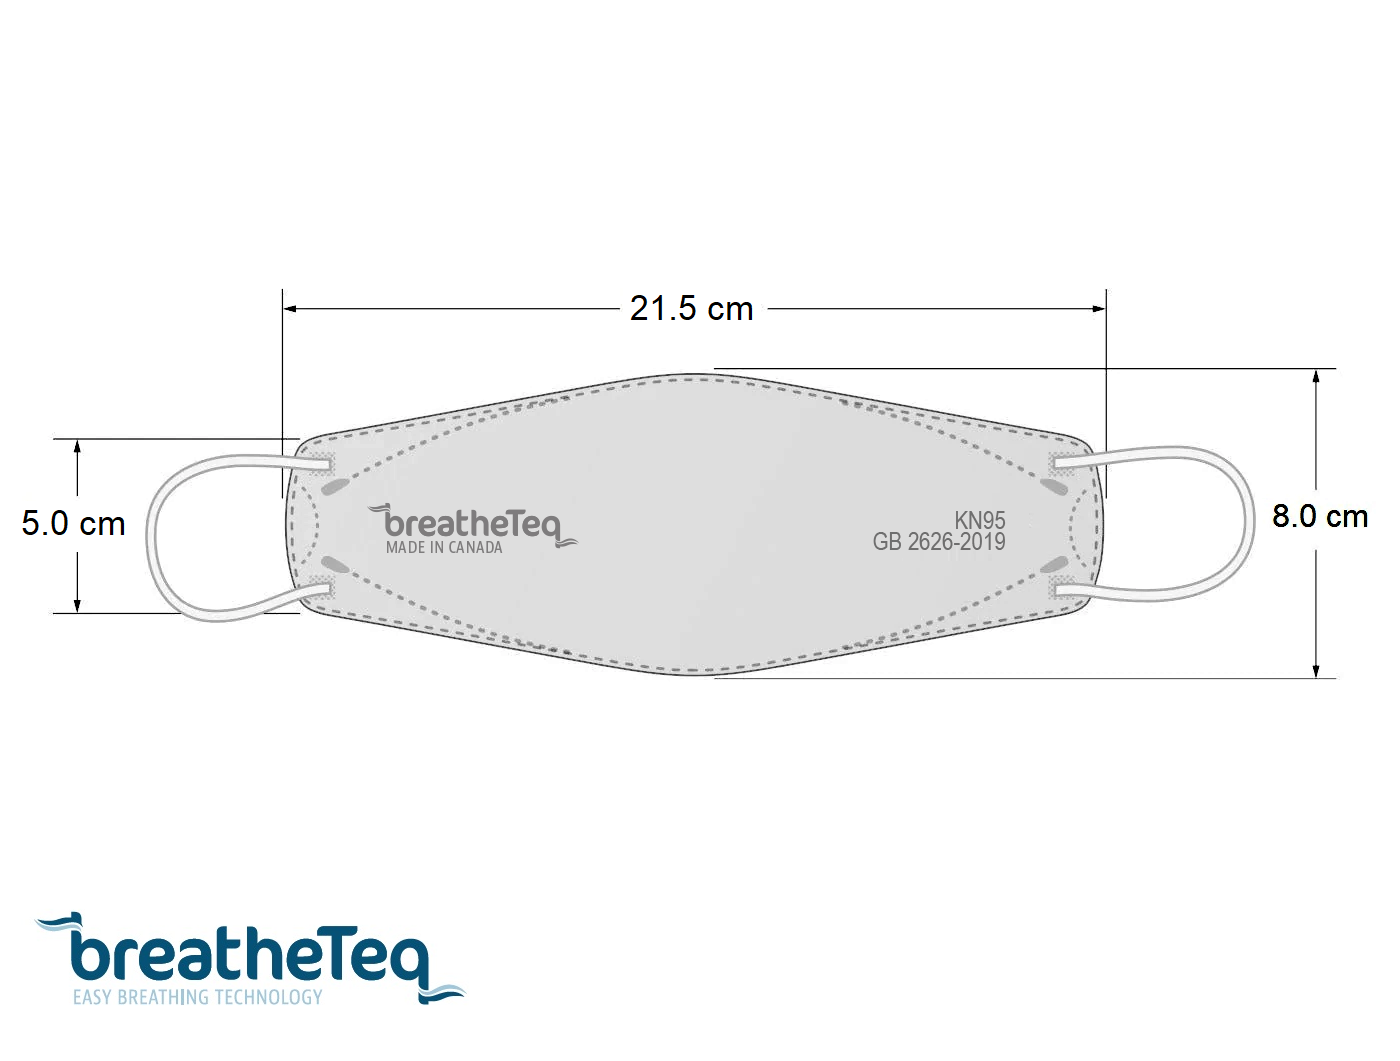 Dimensions of large gray KN95 BreatheTeq earloop mask made in Canada